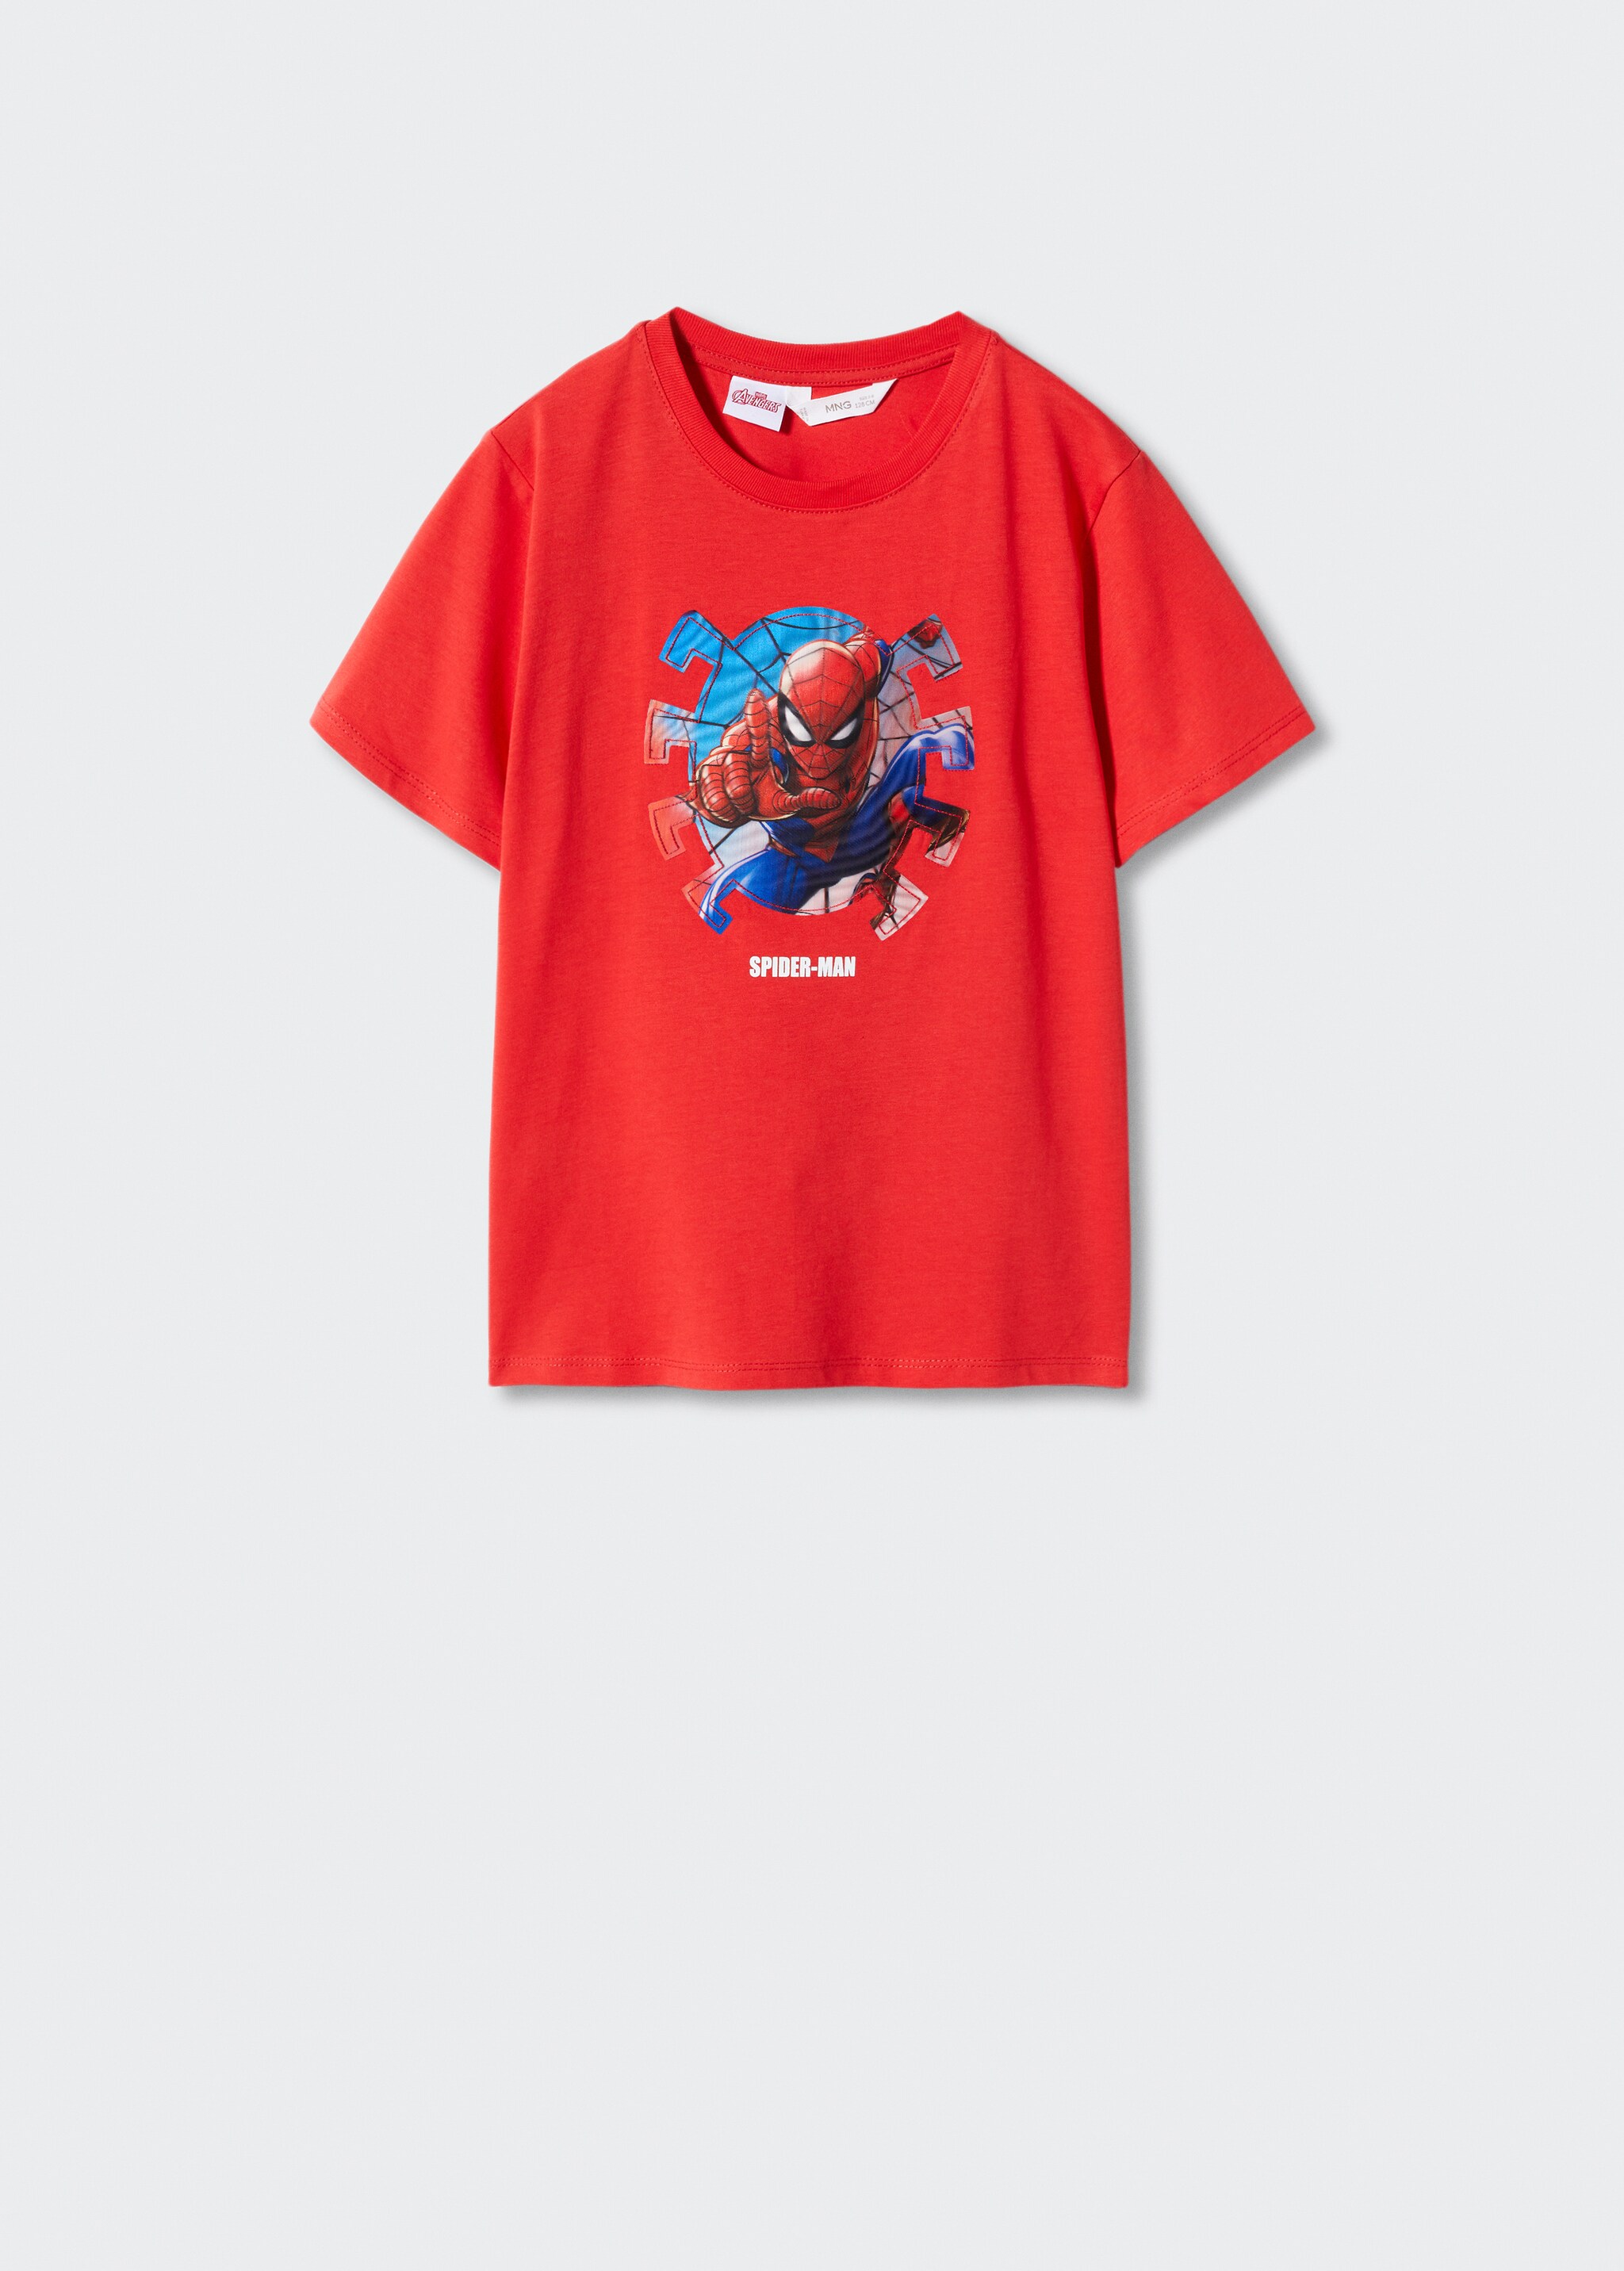 Spider-Man T-shirt - Article without model